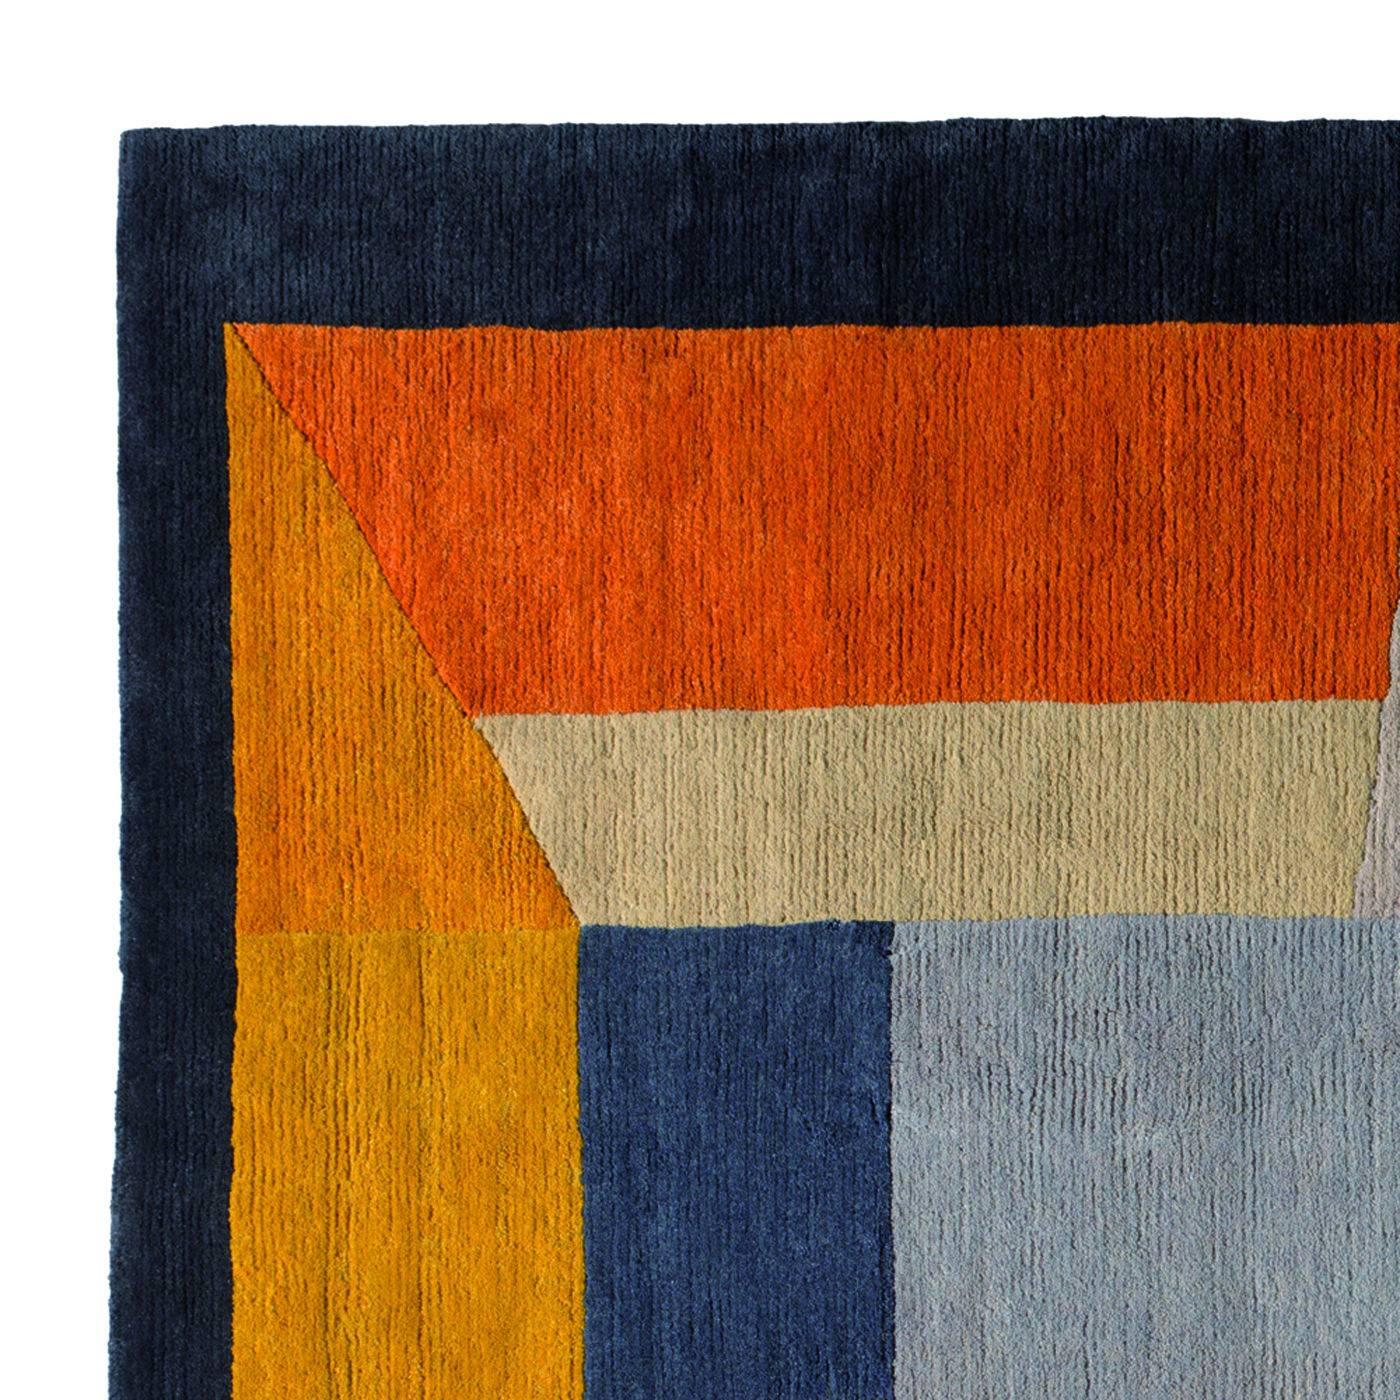 This striking piece by Chung Eun Mo is part of a limited series of 36 carpets made by hand in Nepal in a factory that employs only master artisans and helps its neighborhood by giving a school to their children and a hospital to the Community. The